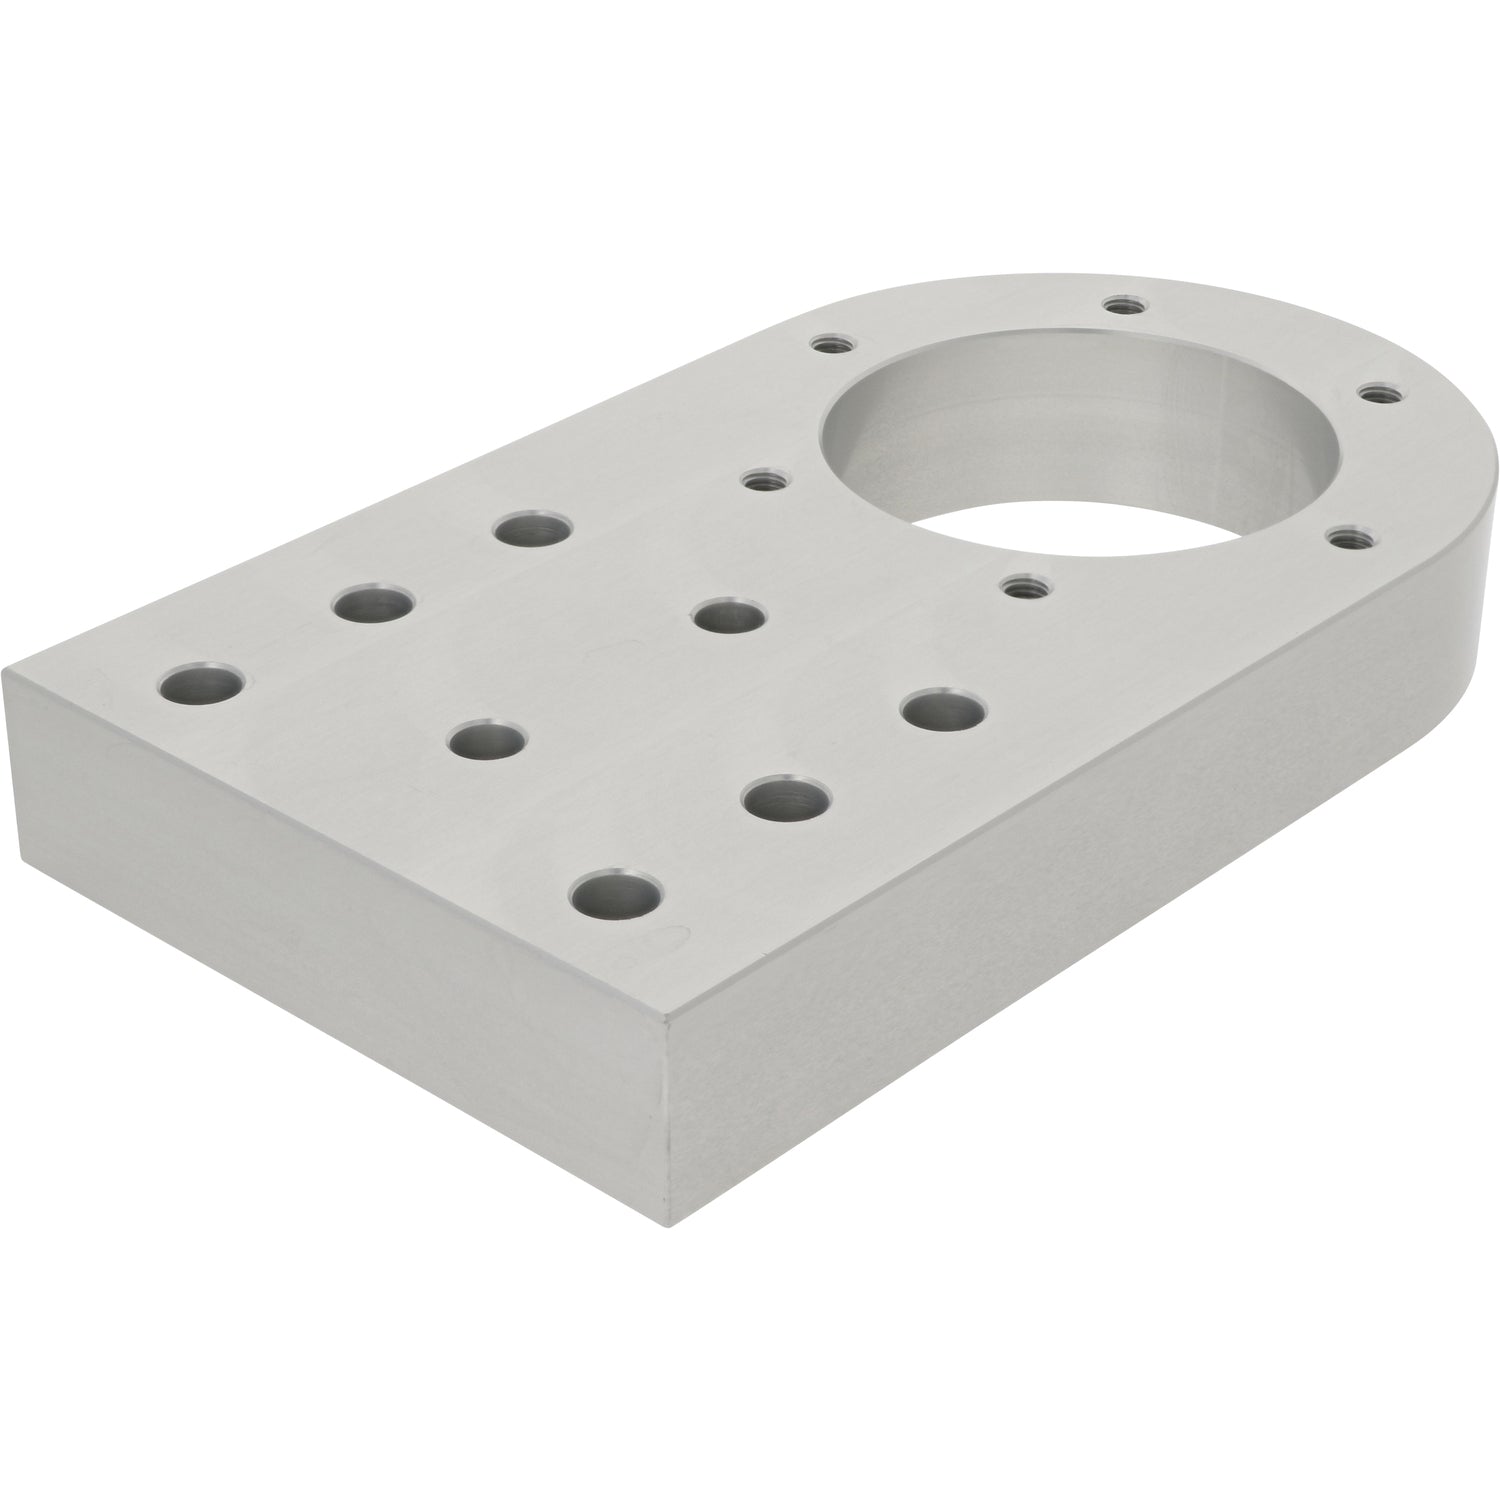 Machined aluminum part with multiple mounting holes. Part shown on white background. 